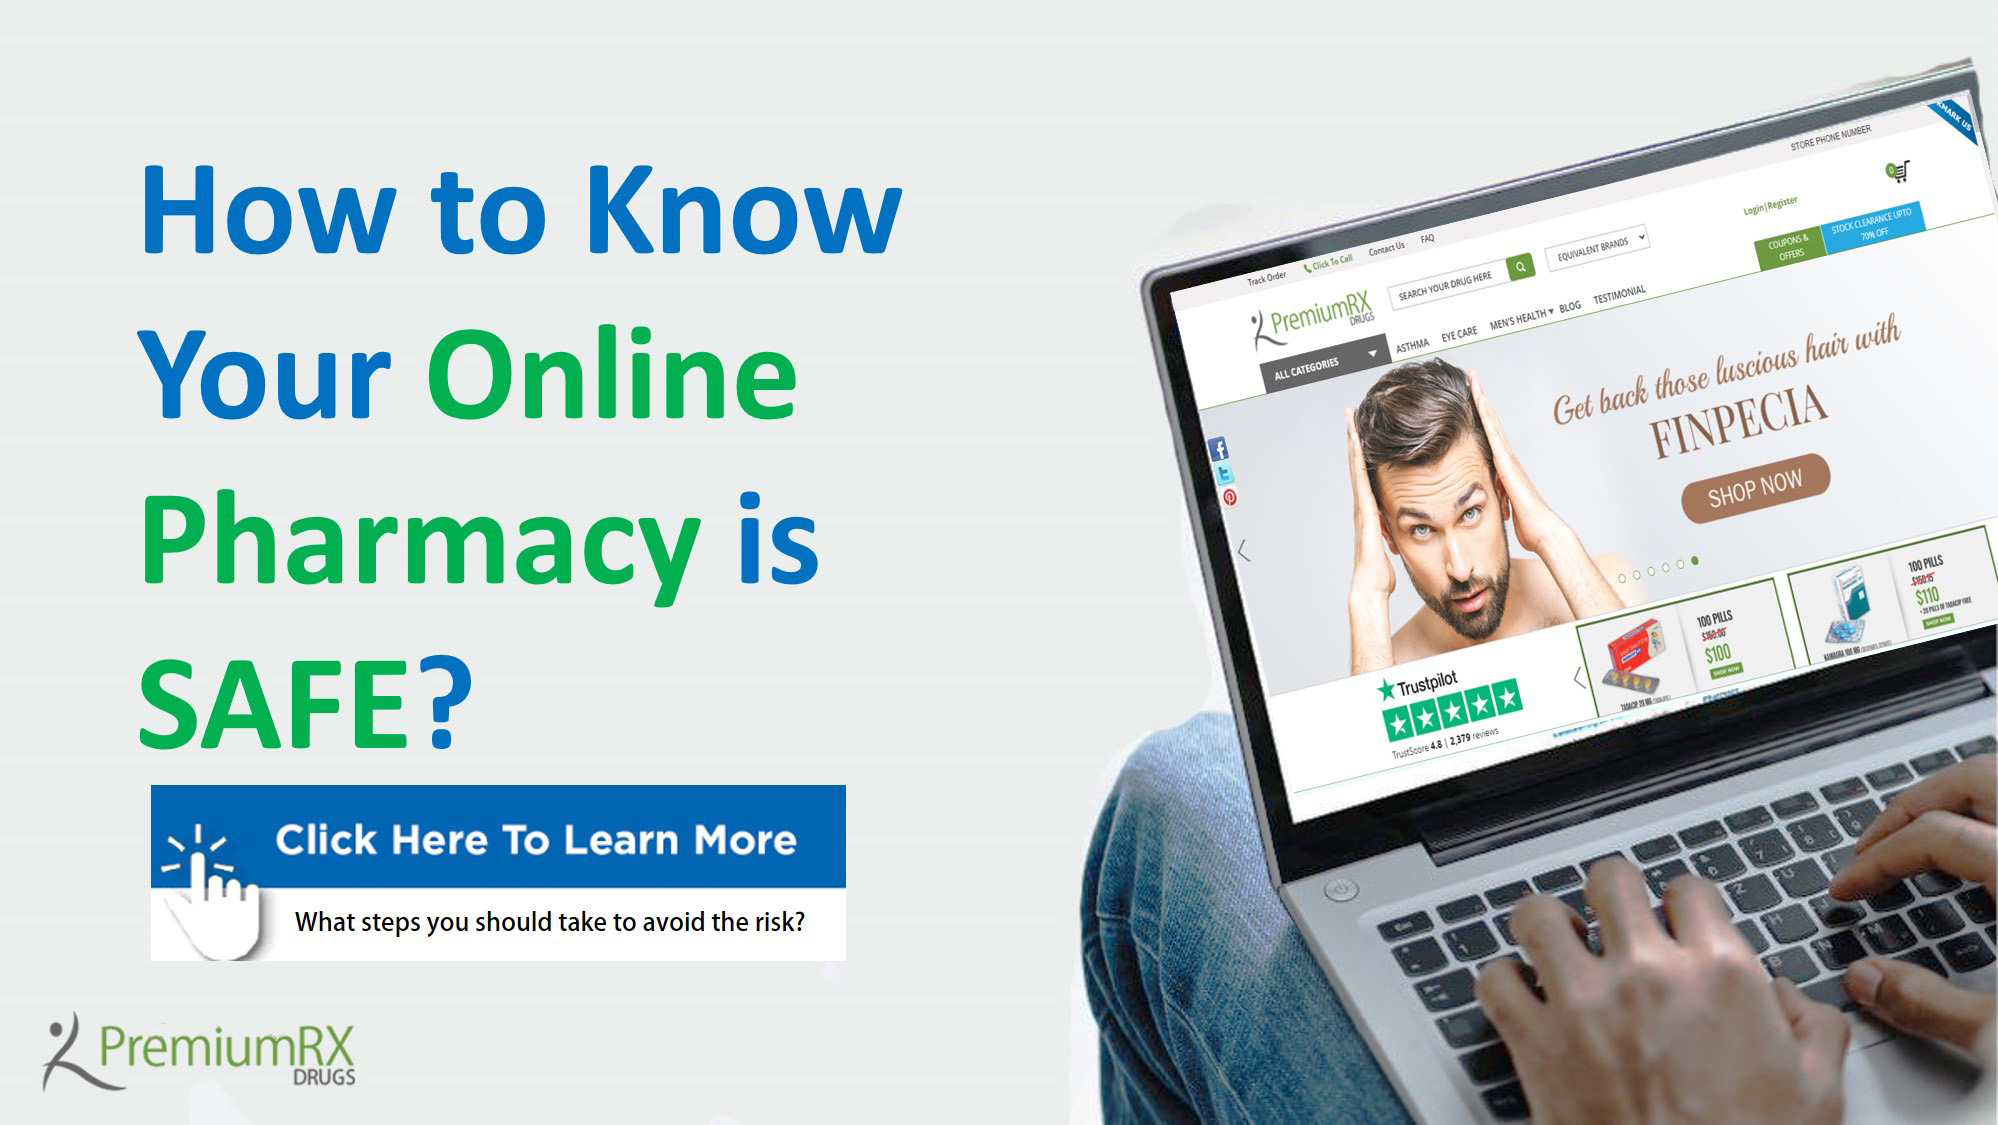 How to Know Your Online Pharmacy is Safe